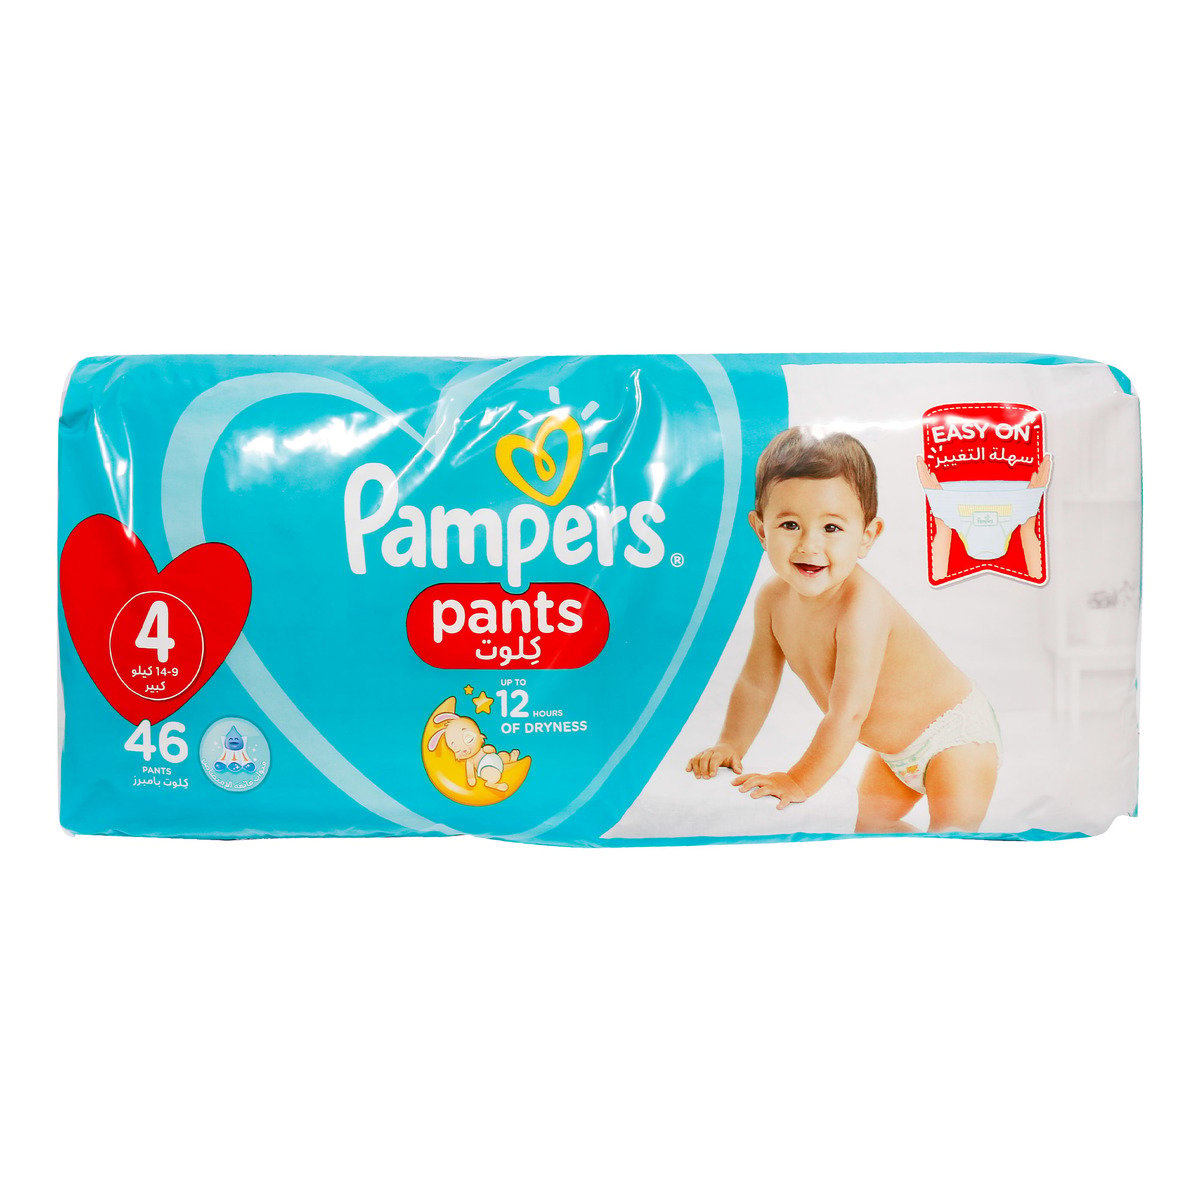 Pampers Diaper Pants Value Pack Size 4 9-14kg 46 Count Online at